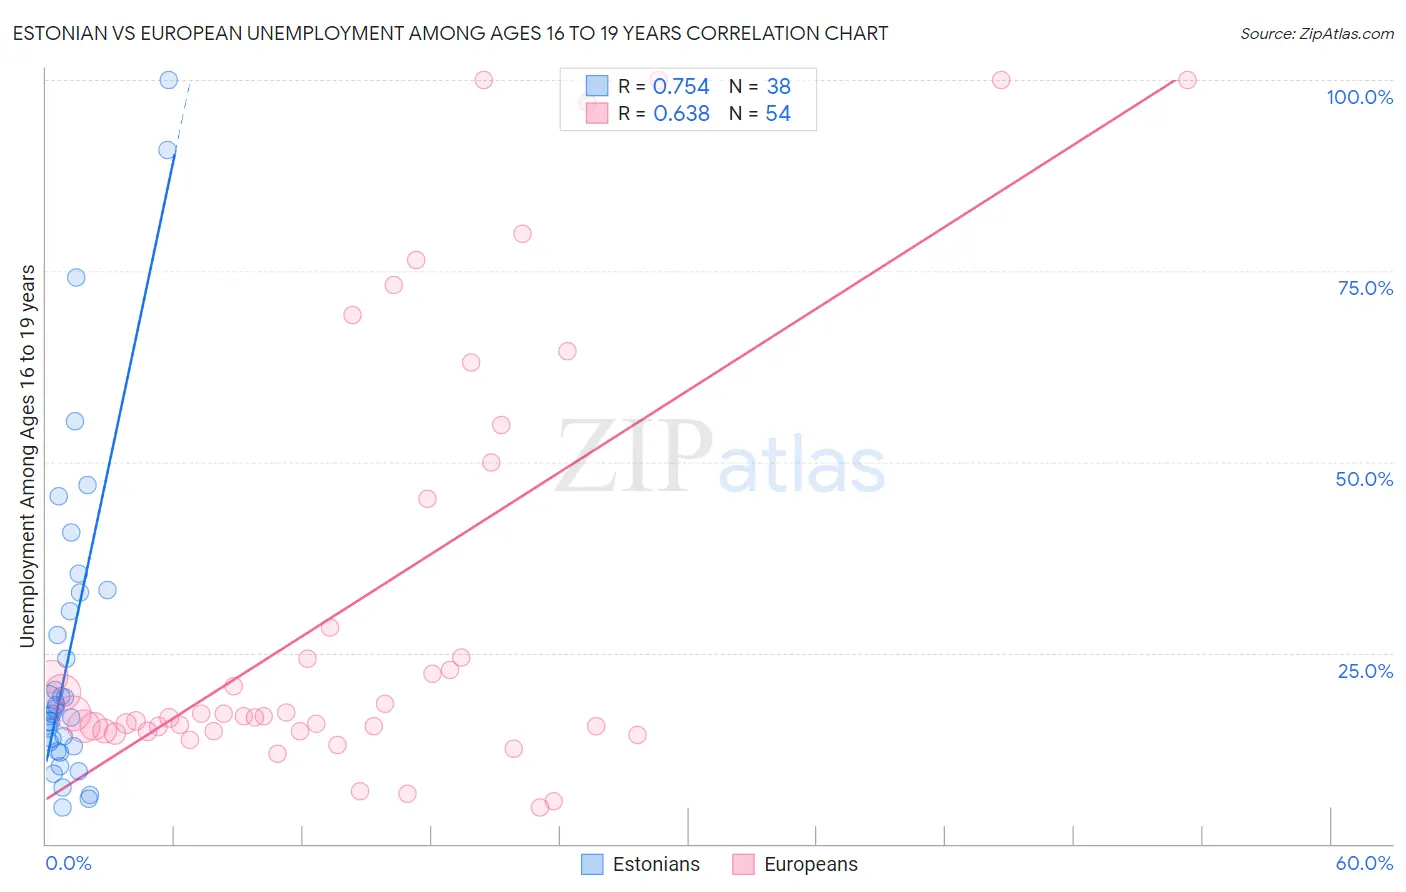 Estonian vs European Unemployment Among Ages 16 to 19 years